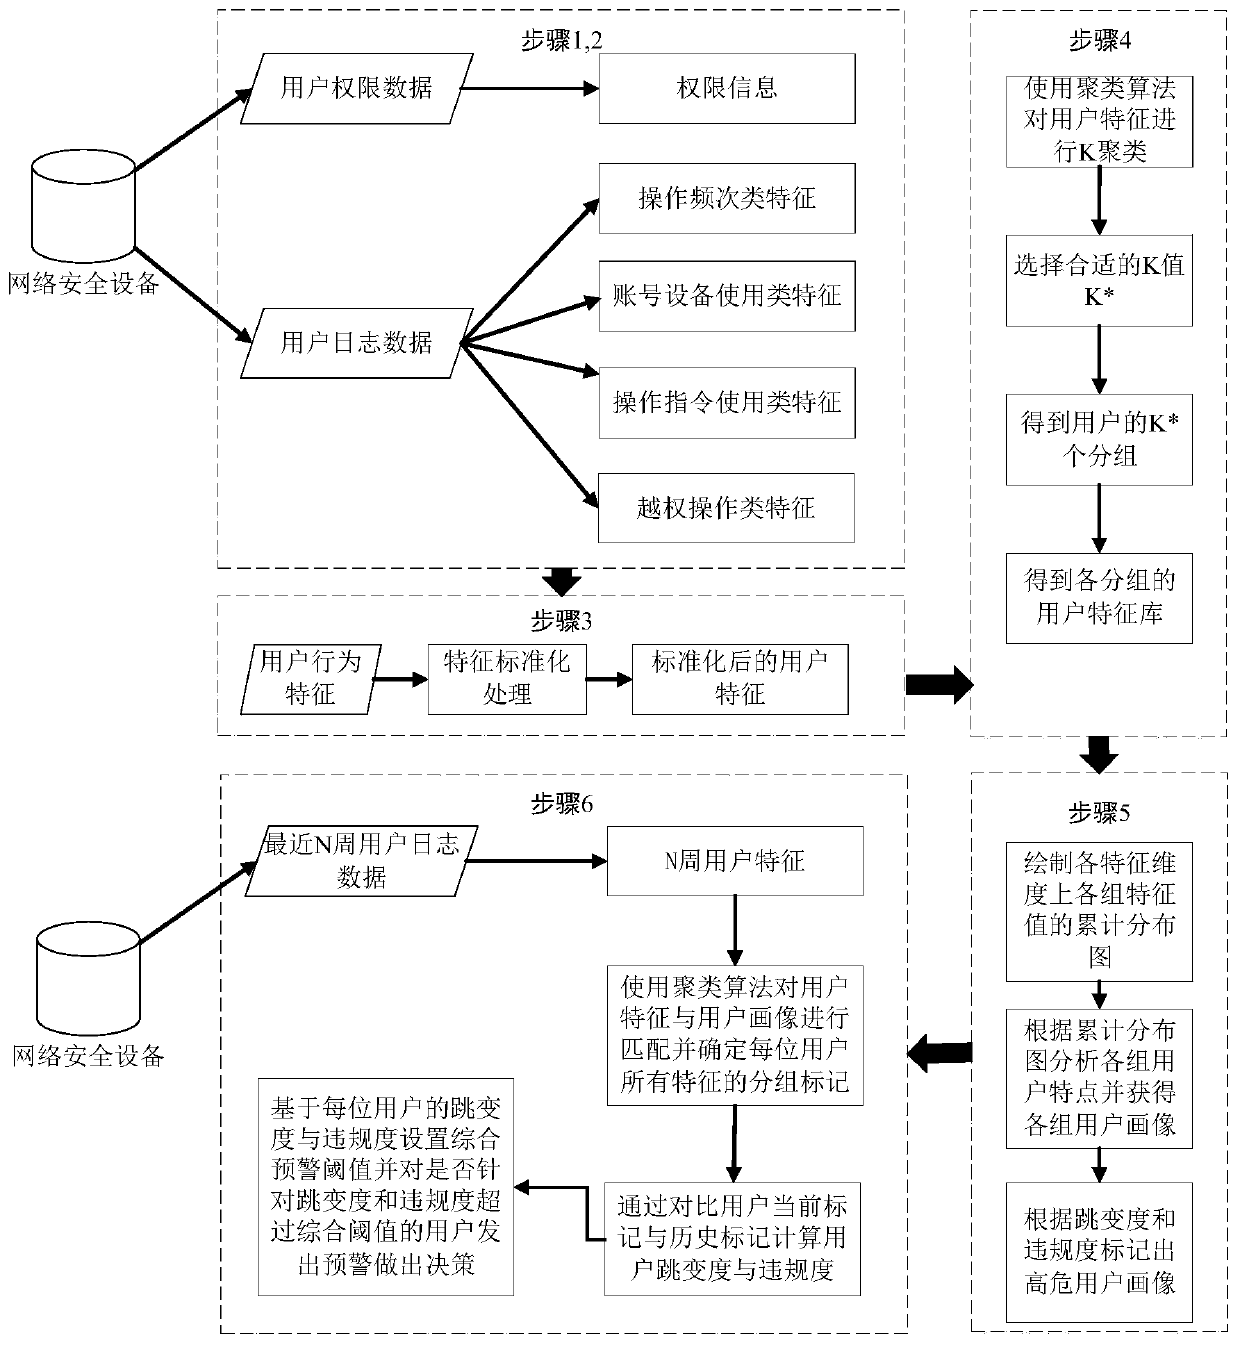 User portrait grouping and behavior analysis method and system based on log data of network security equipment